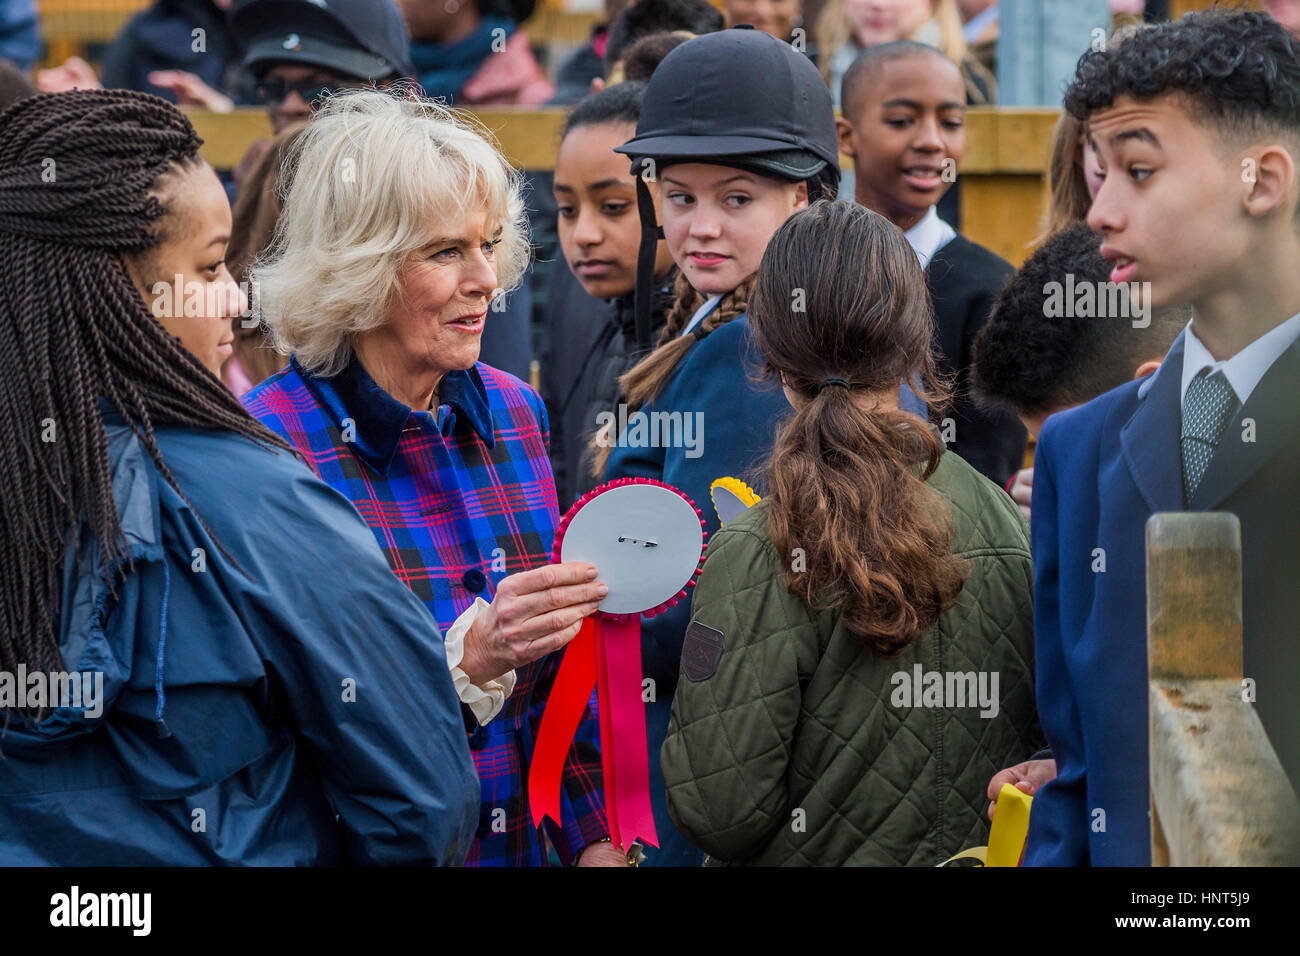 London, UK. 16th February 2017. the Duchess hands out rosettes - The Duchess of Cornwall, President, Ebony Horse Club, visits the charity's Brixton riding centre. The centre is celebrating its 21st birthday and its 6th year on this site. London 16 Feb 2017 . Credit: Guy Bell/Alamy Live News Stock Photo